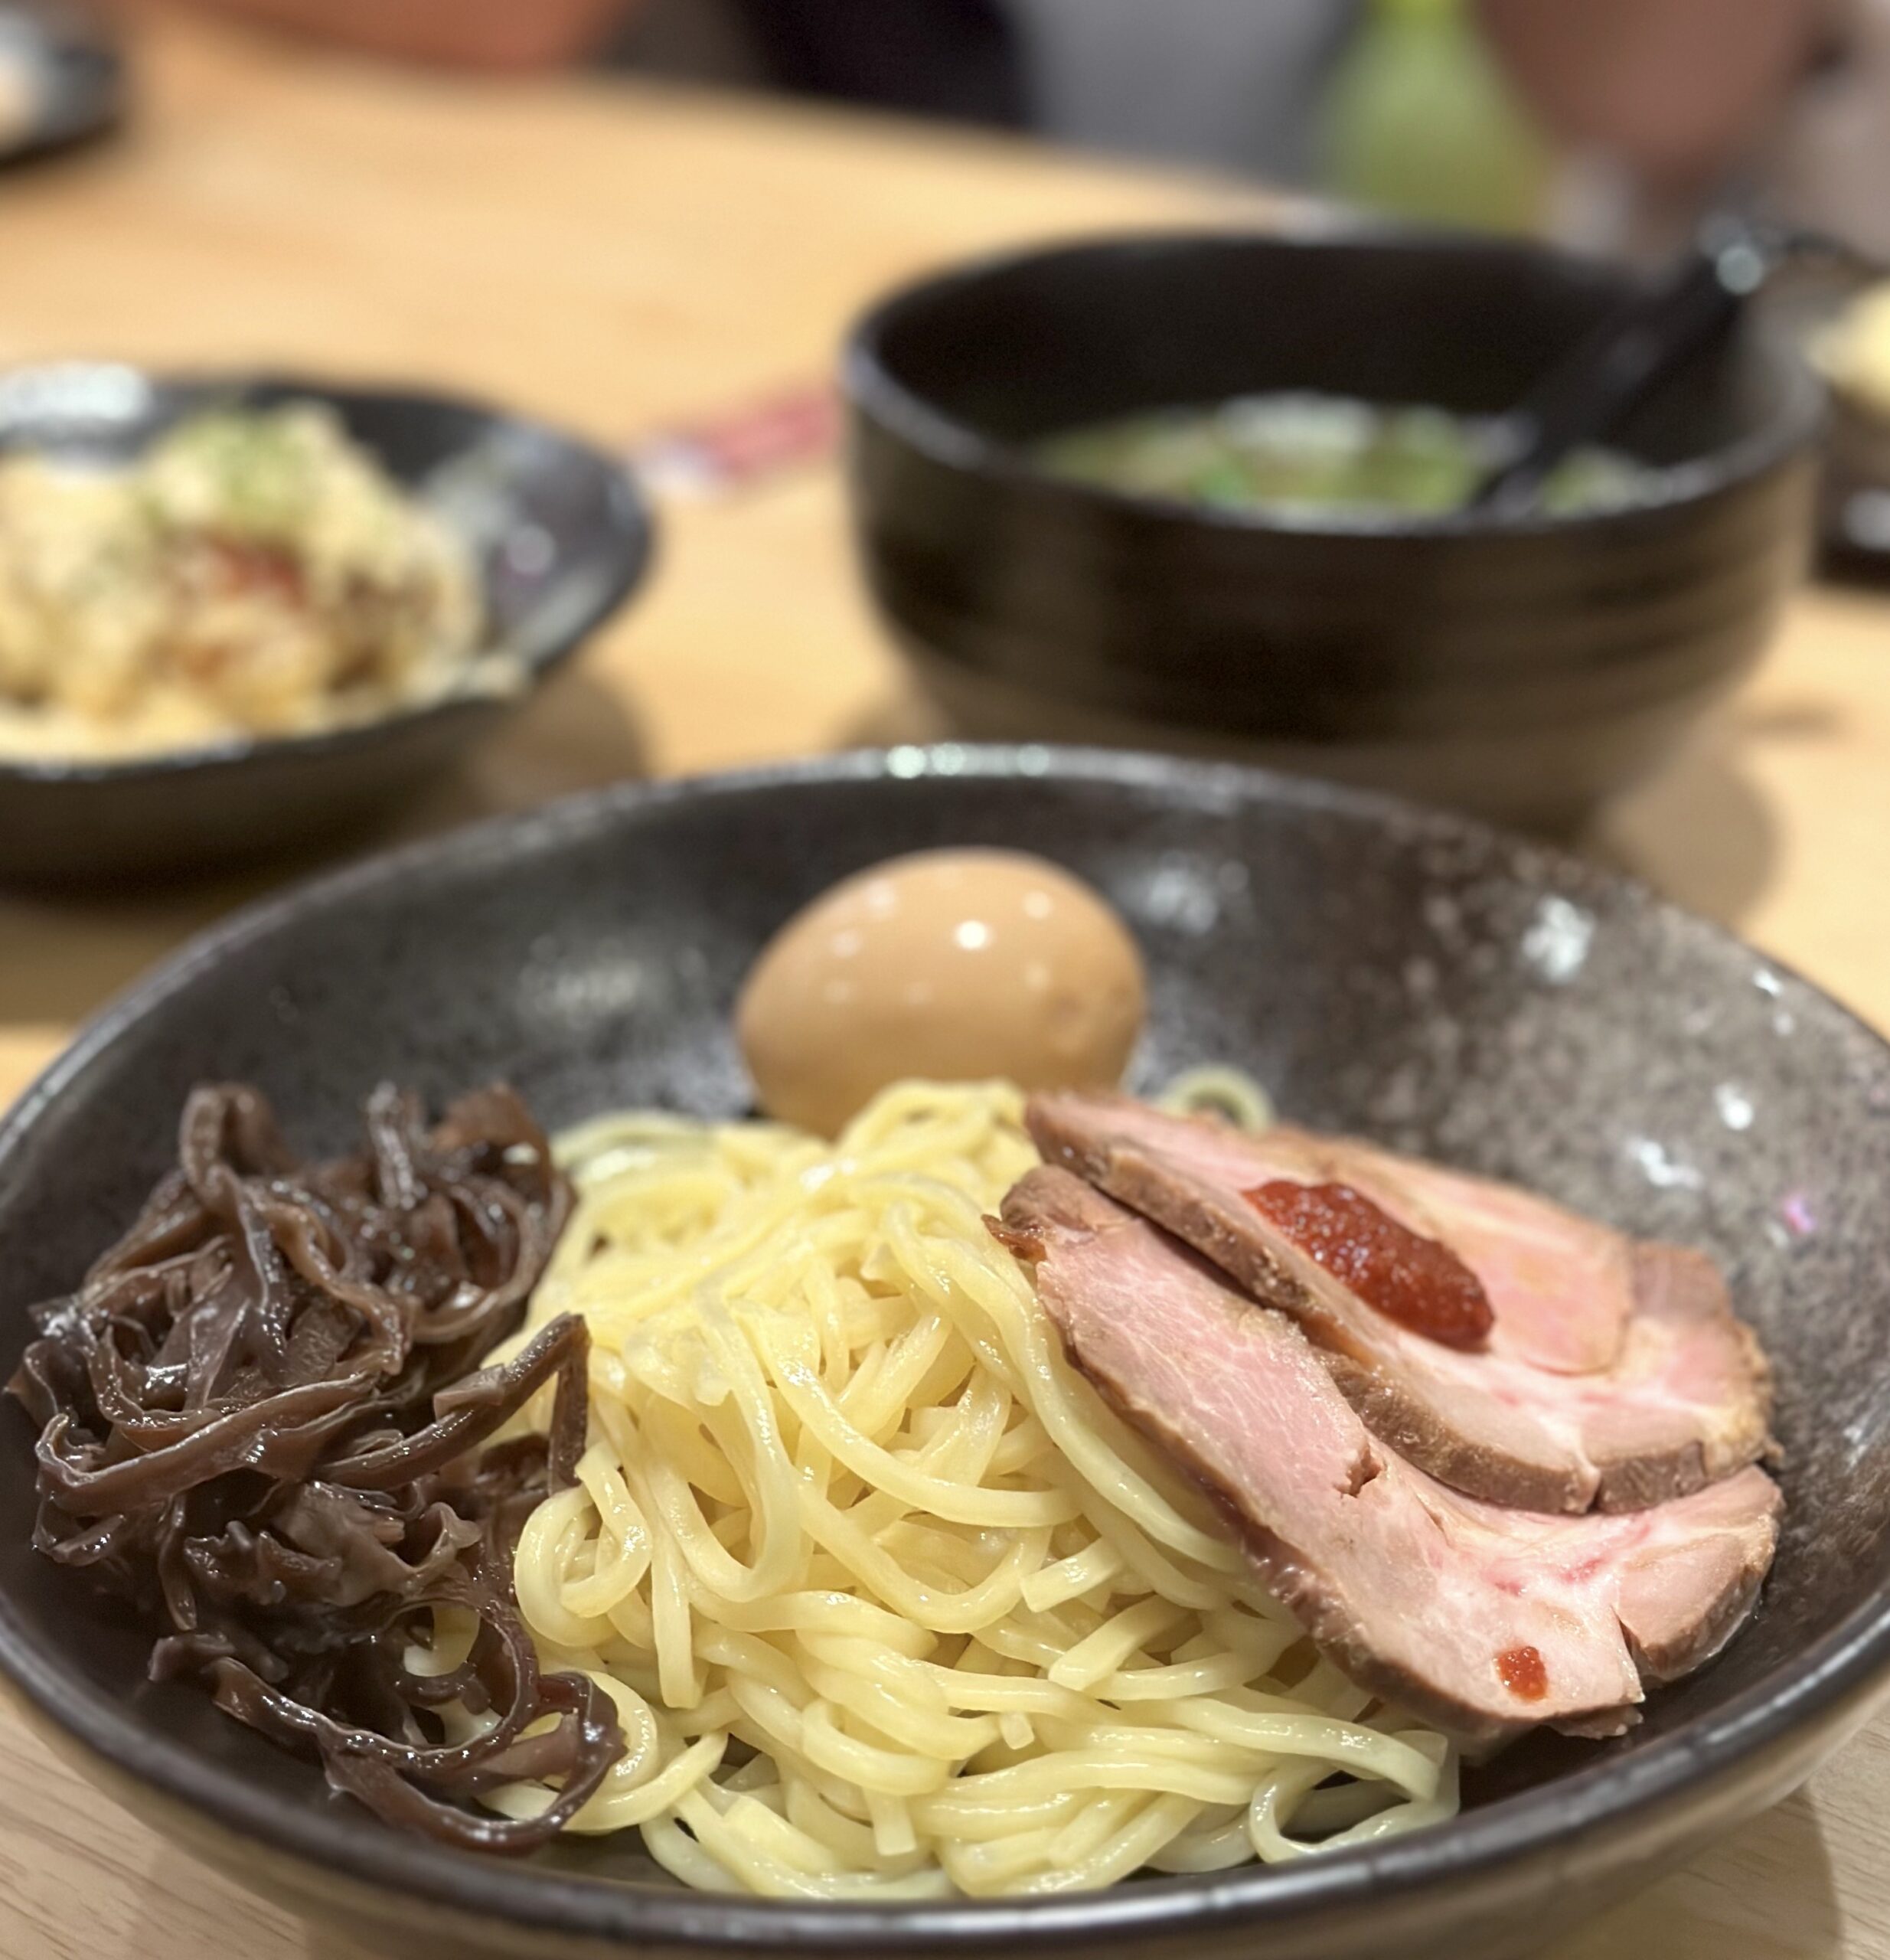 Durian ramen at menya shishido pj almost tore our gang apart. Here's what we think about this bold rm40 dish | weirdkaya